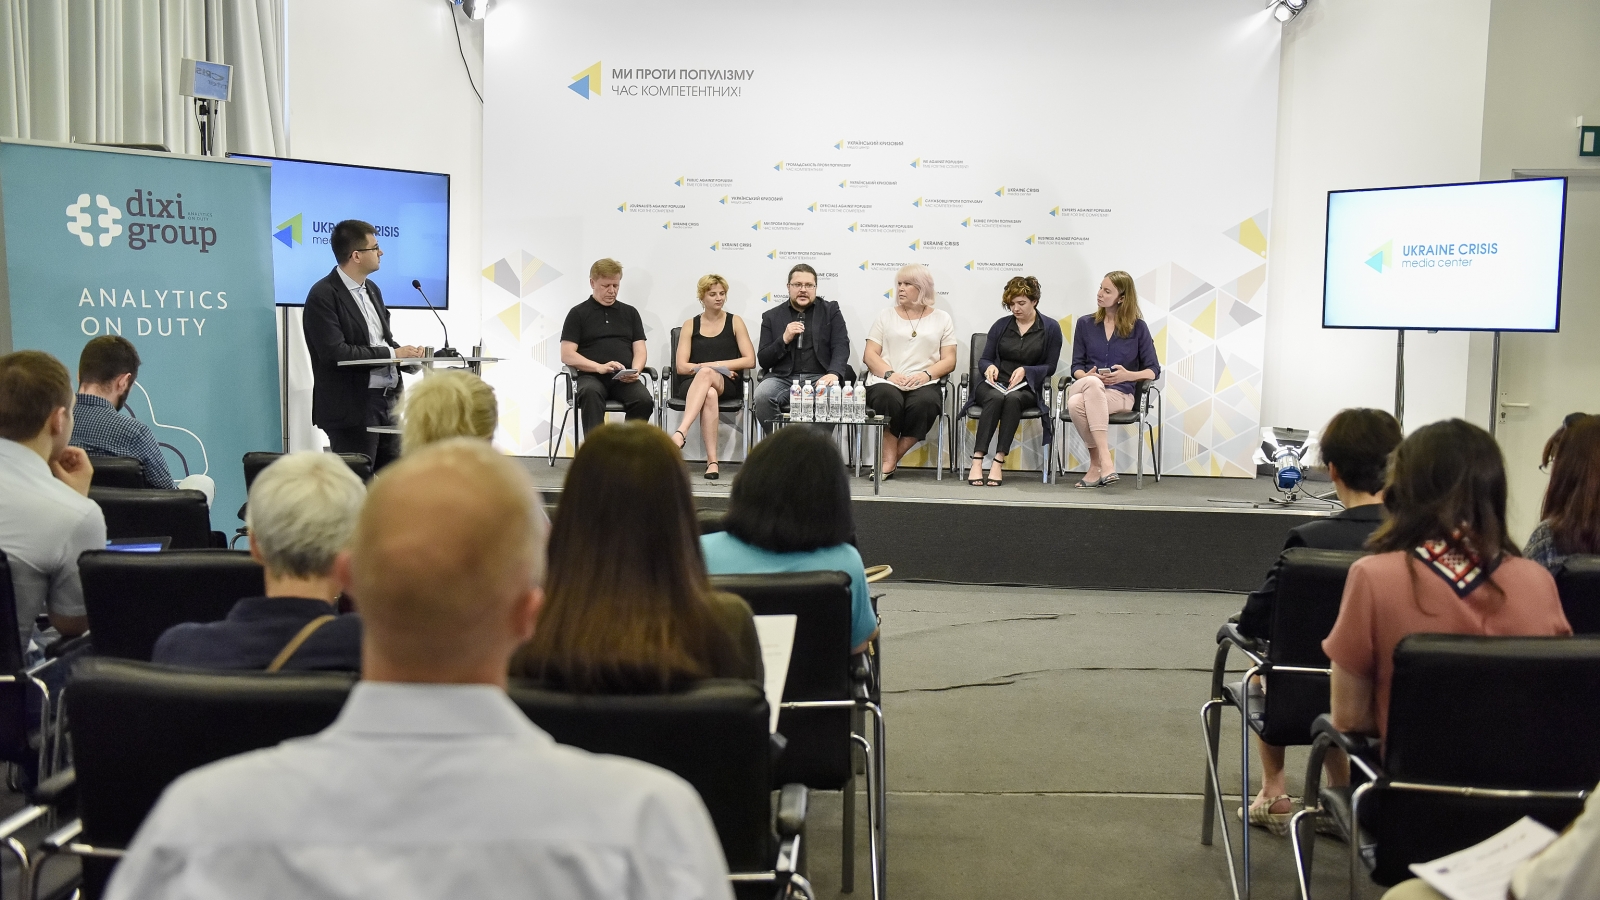 Ukraine: Experts call for further reforms in energy and environment fields